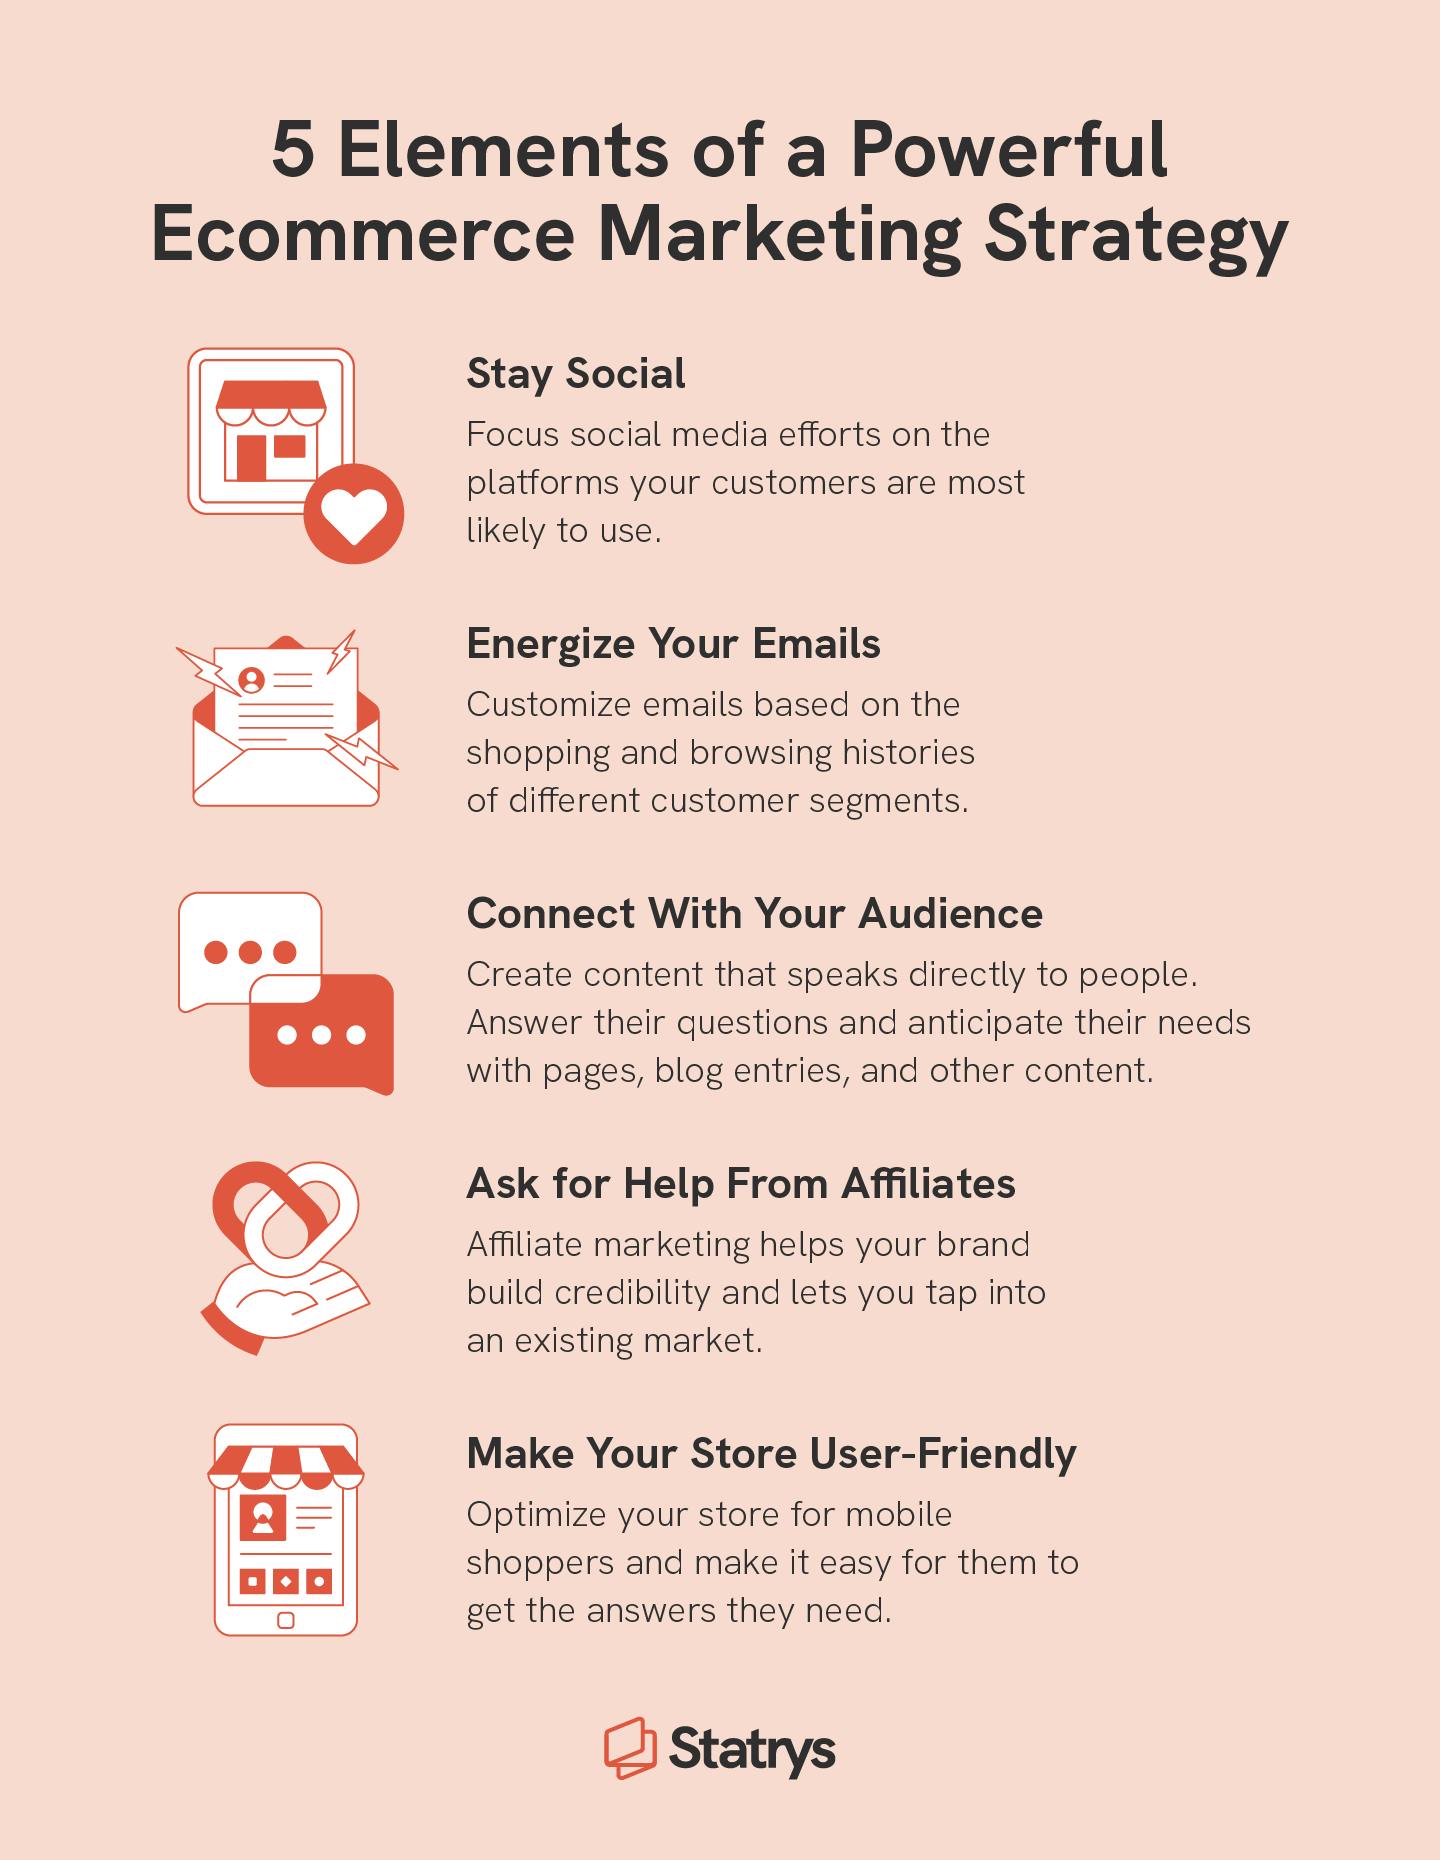 An illustrated chart covering social media, emails, content marketing, affiliate marketing, and mobile-friendly stores that can help you learn how to grow an ecommerce business.